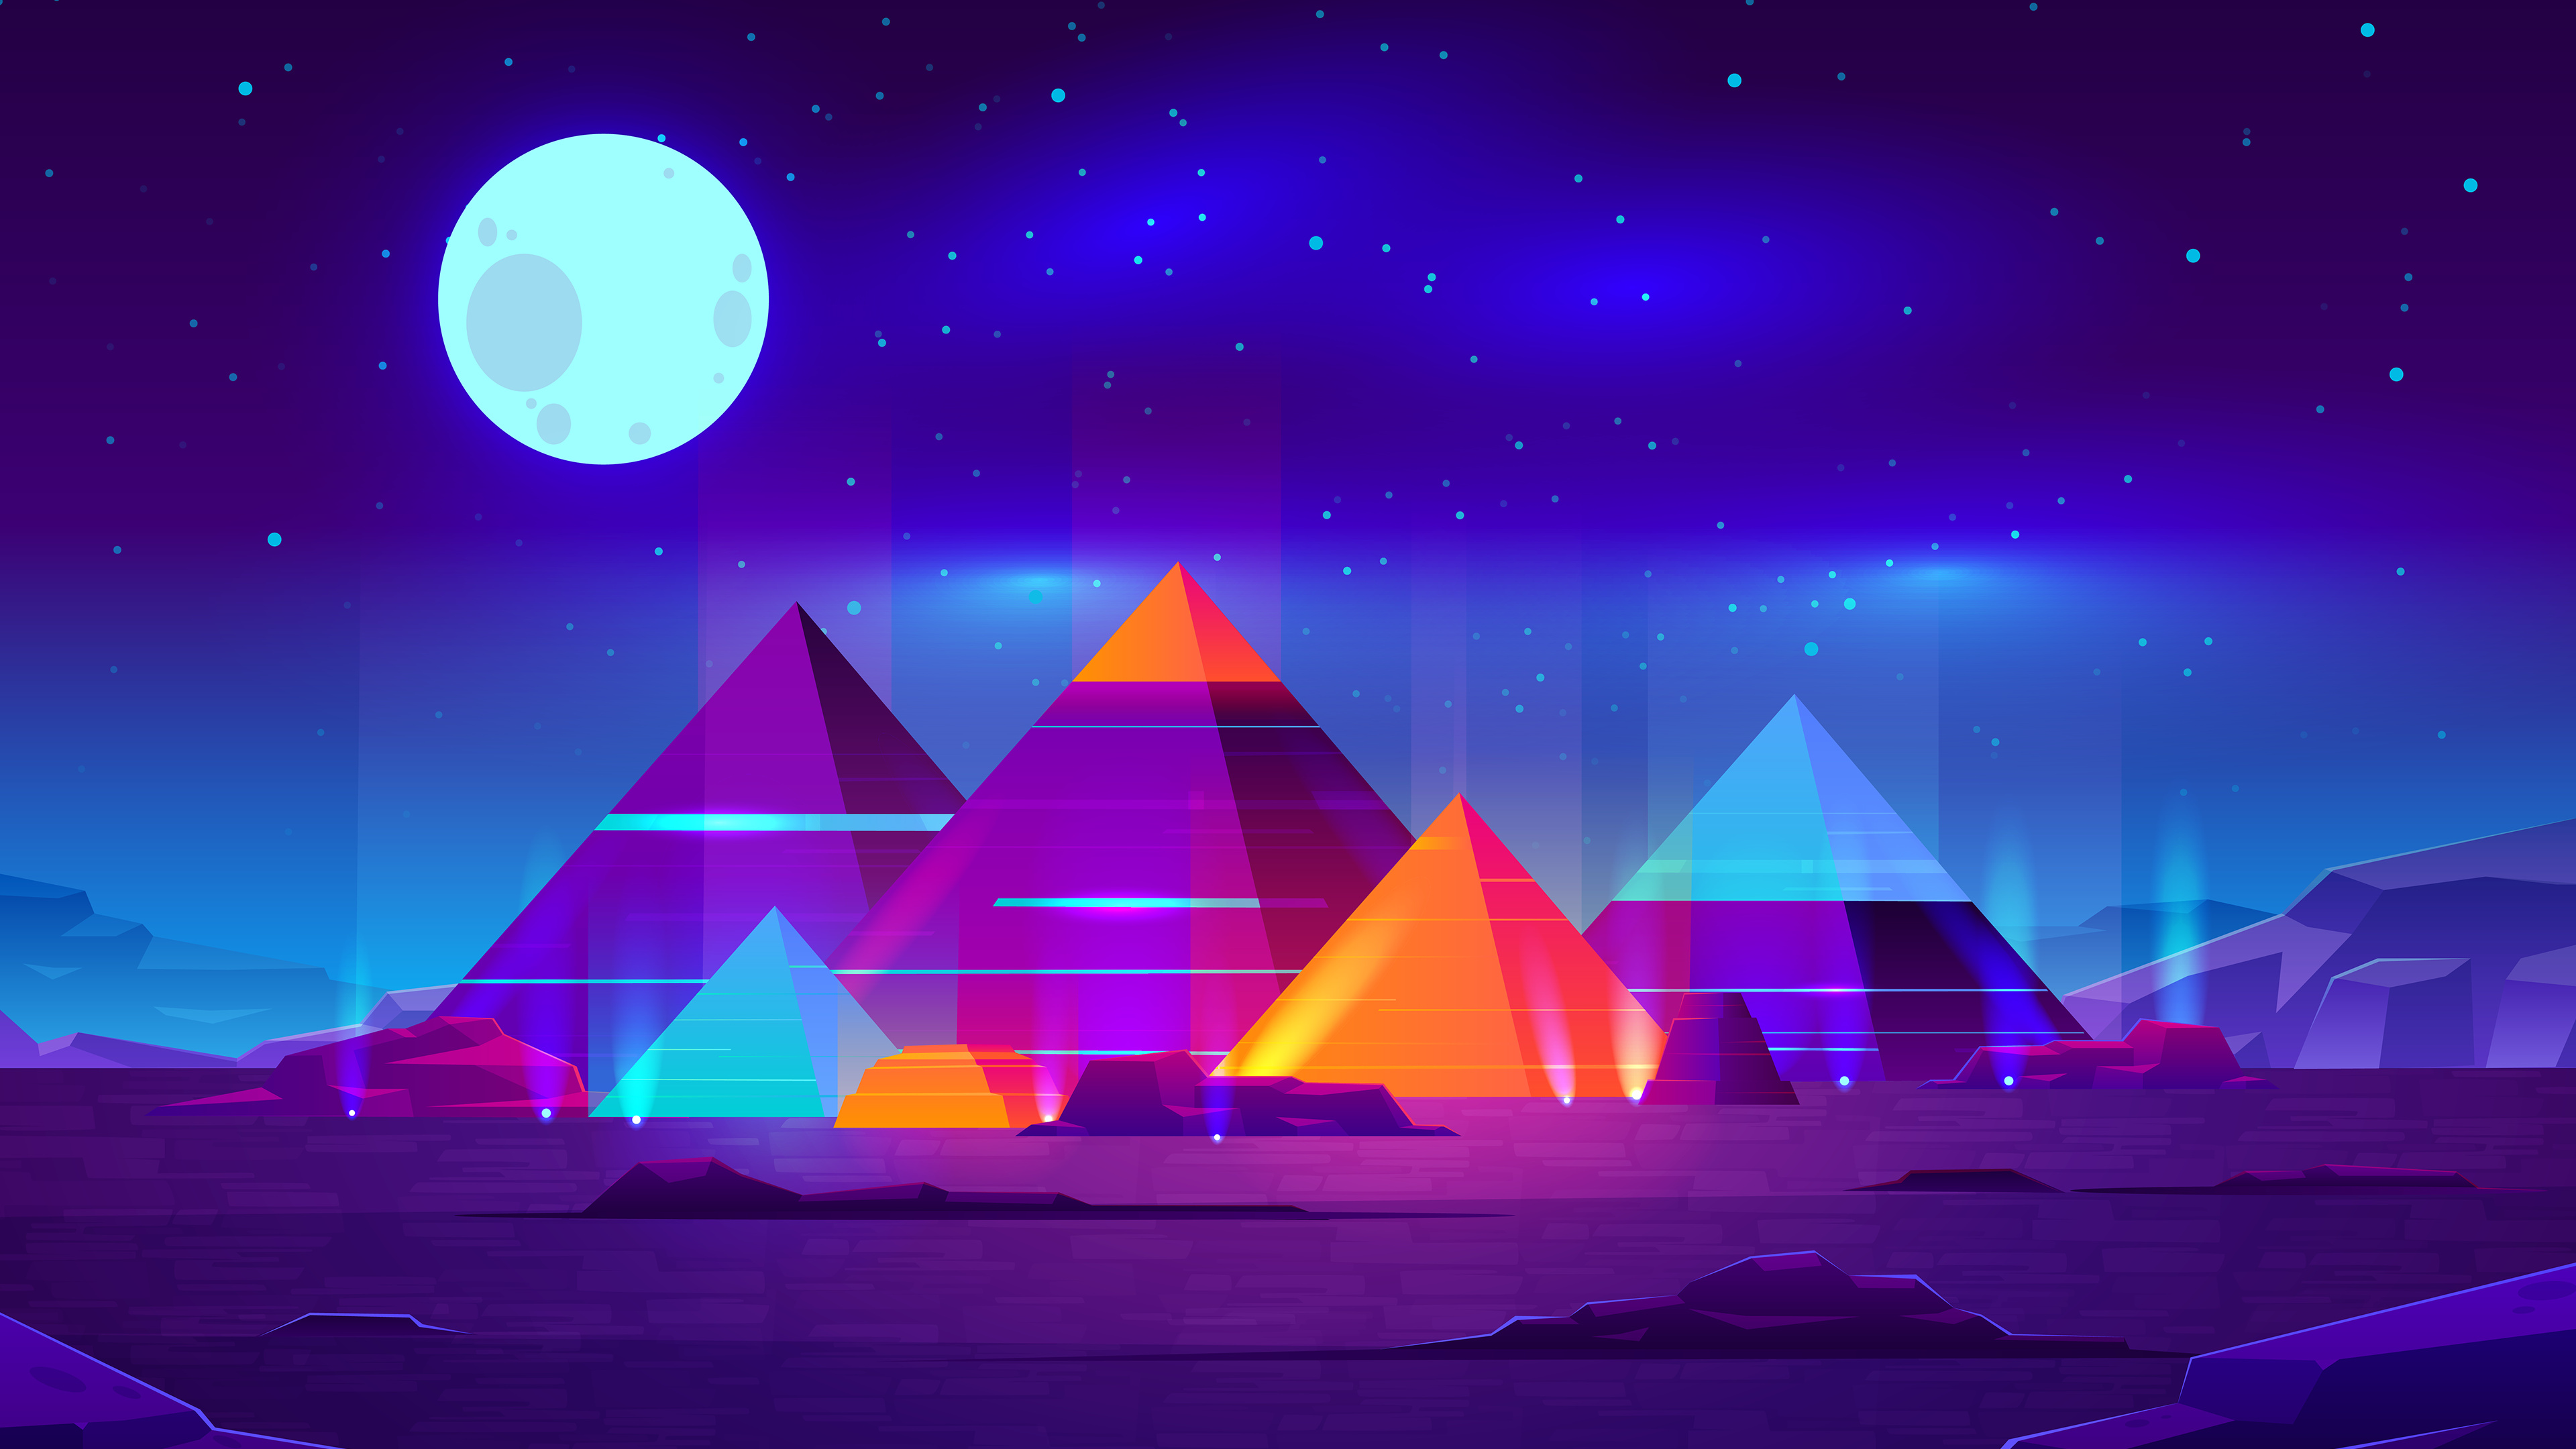 Pyramid Background Images HD Pictures and Wallpaper For Free Download   Pngtree